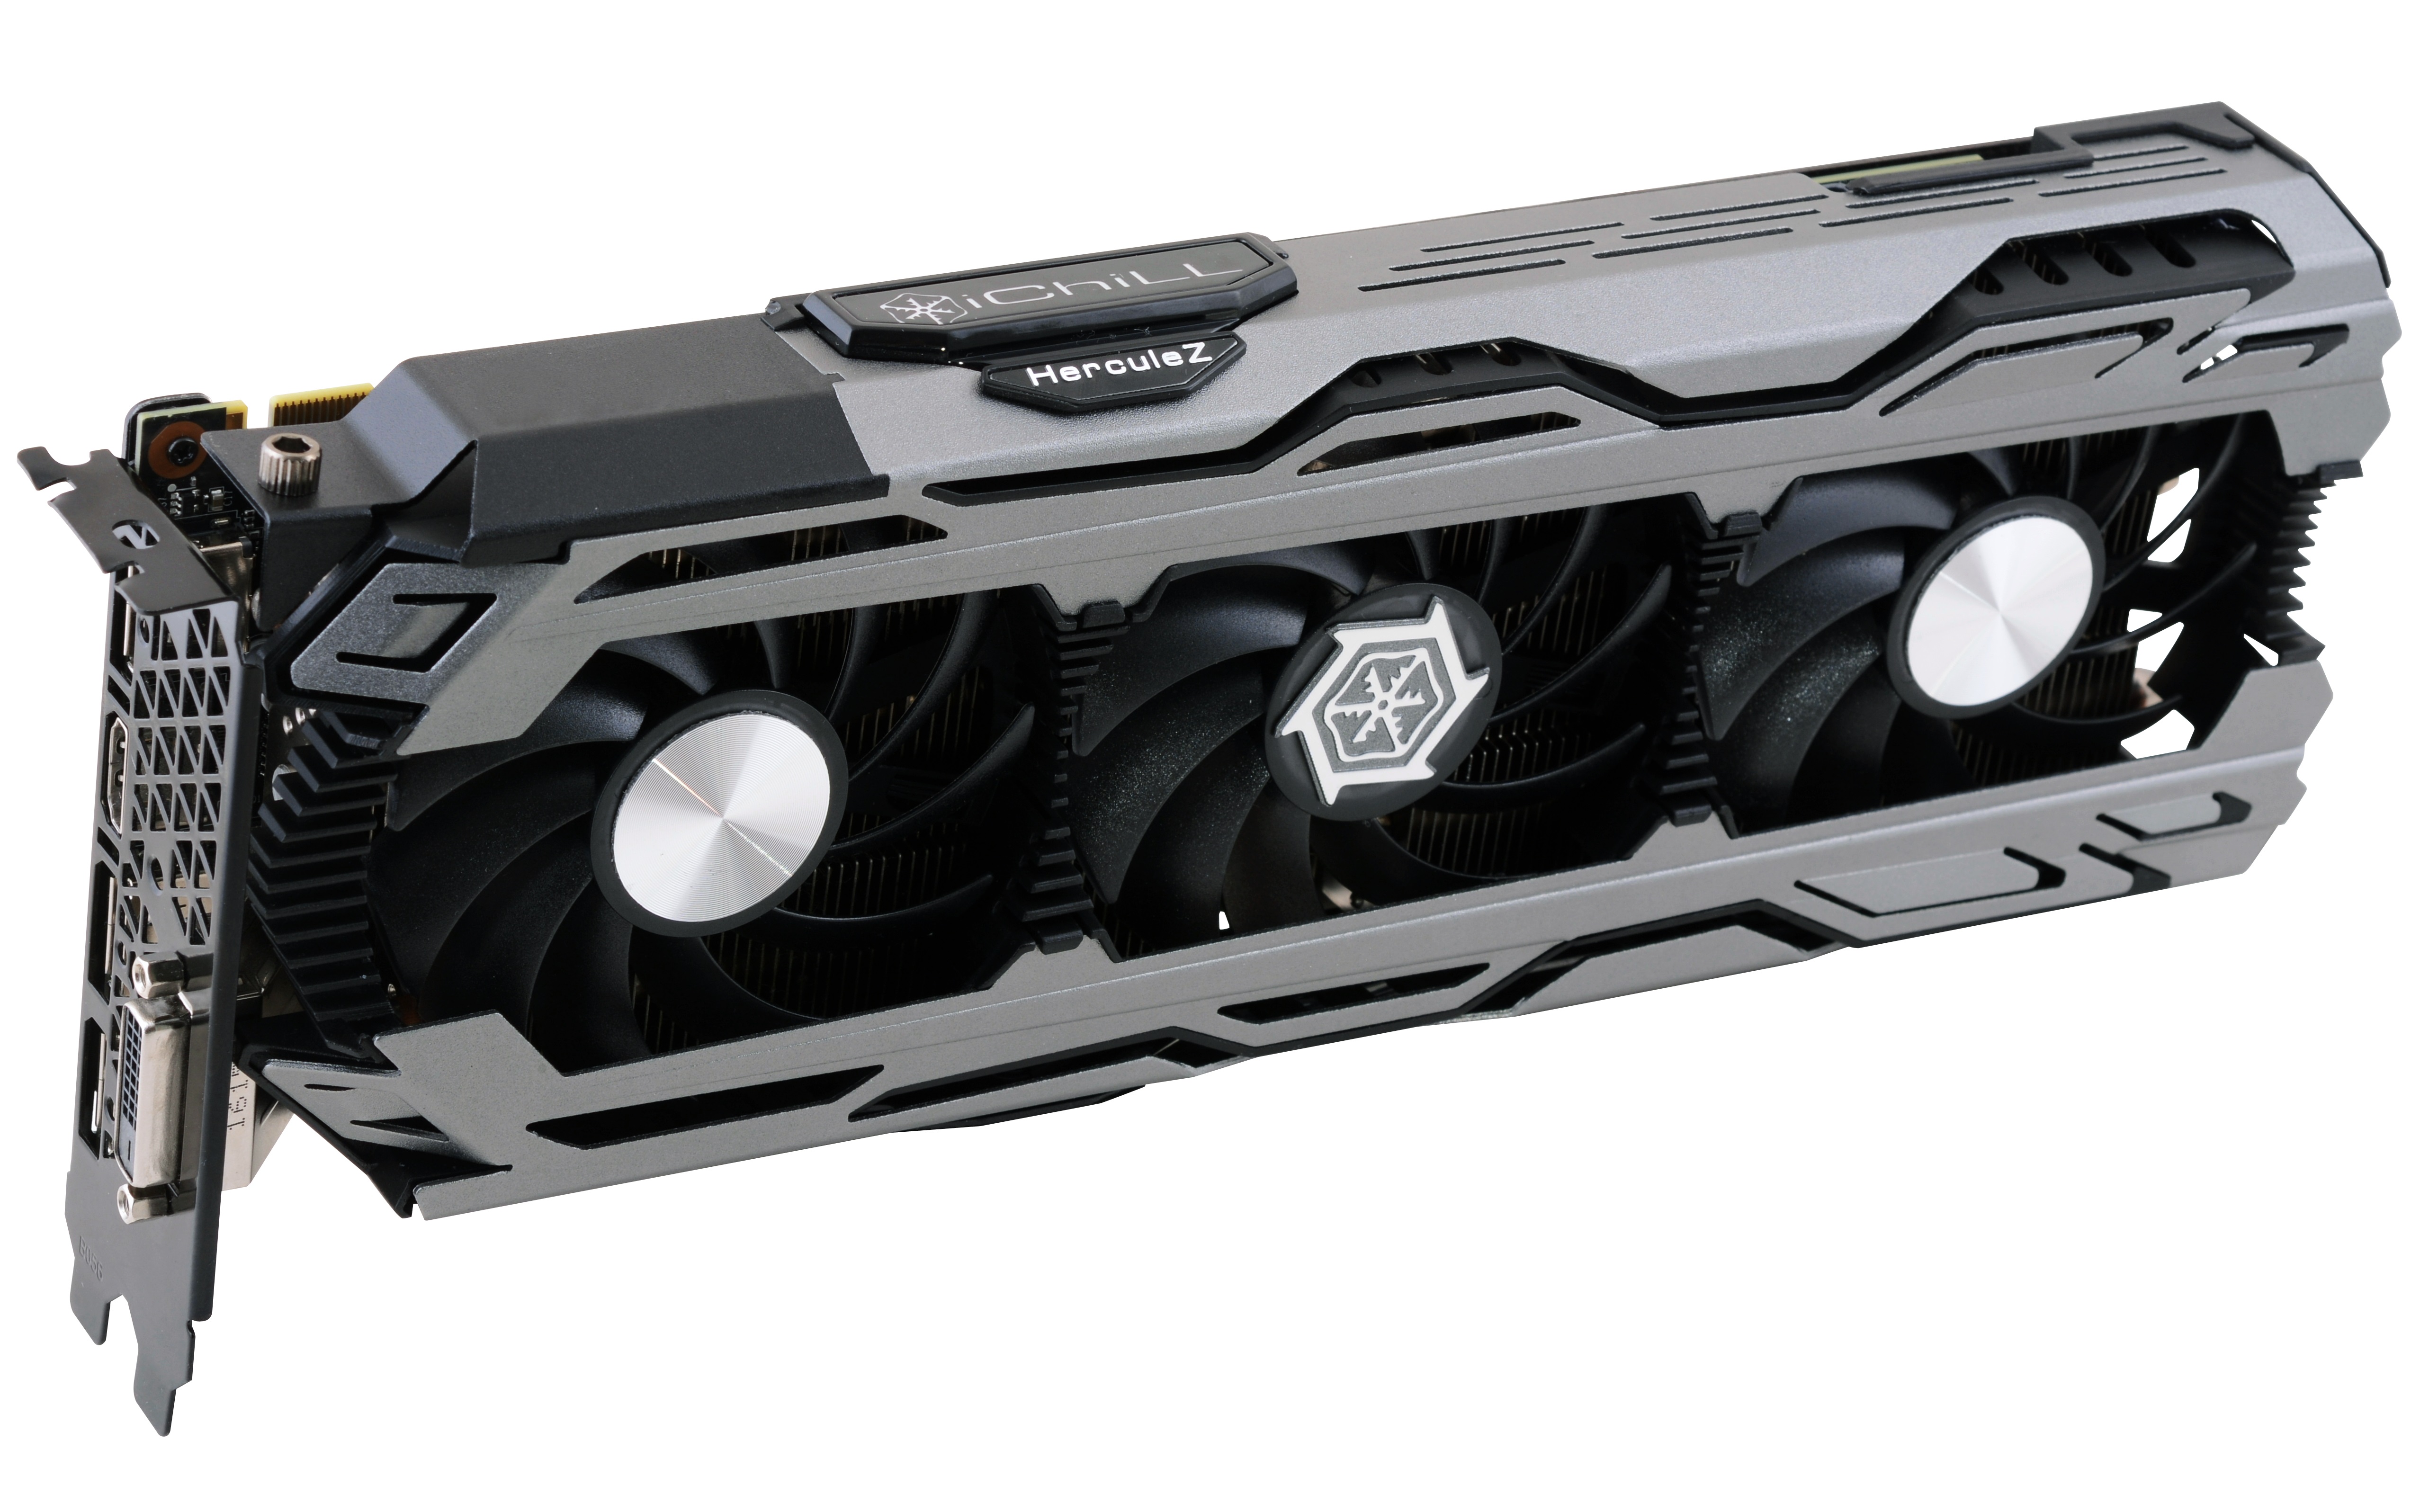 Inno3D introduces two new GeForce GTX1080 Graphic Card Series